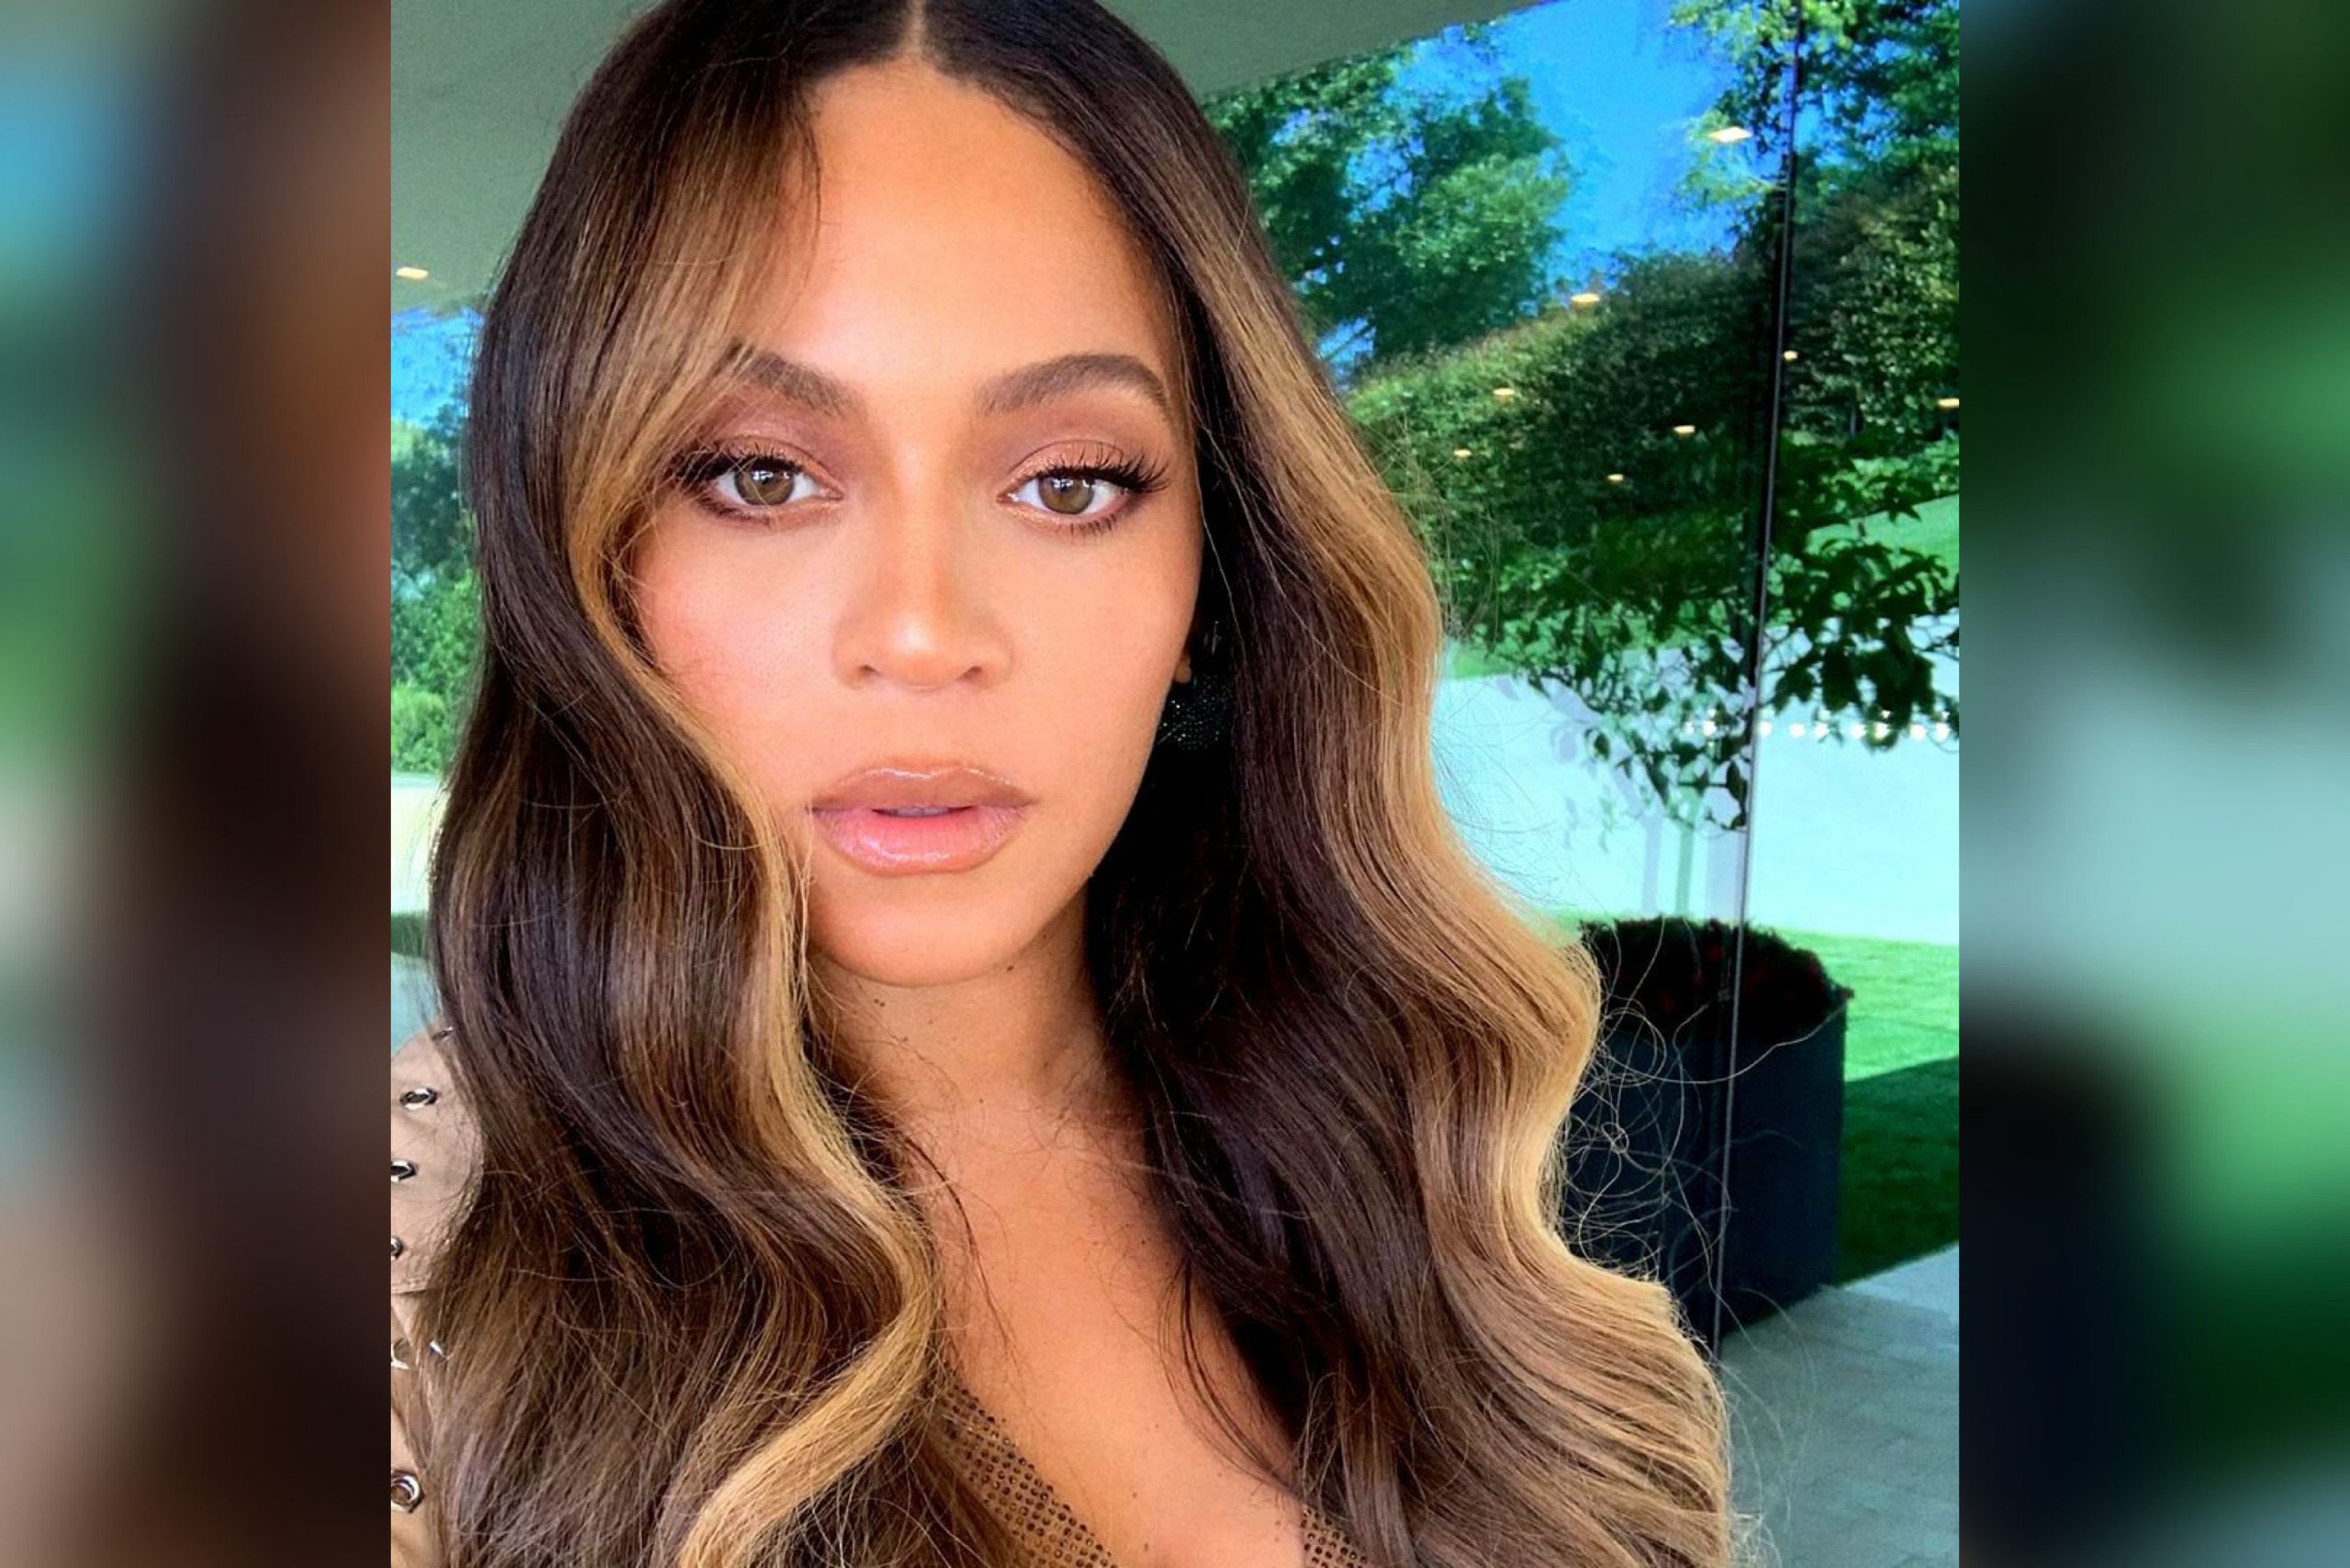 Beyoncé Teases New Haircare Line: ‘Can’t Wait for You to Experience What I’ve Been Creating